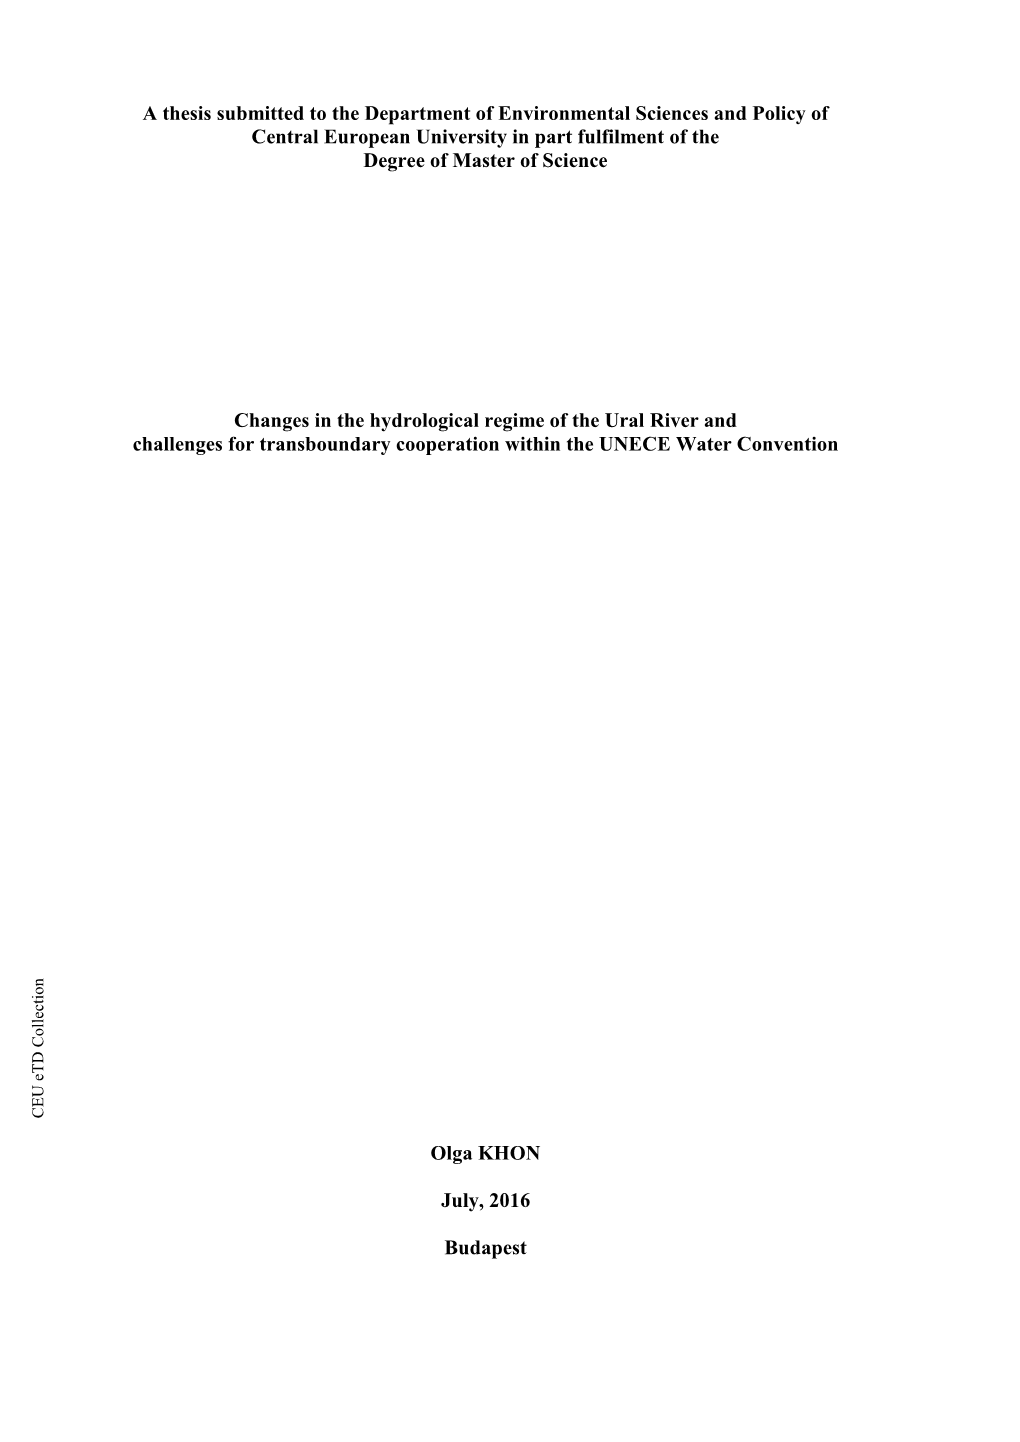 A Thesis Submitted to the Central European University, Department